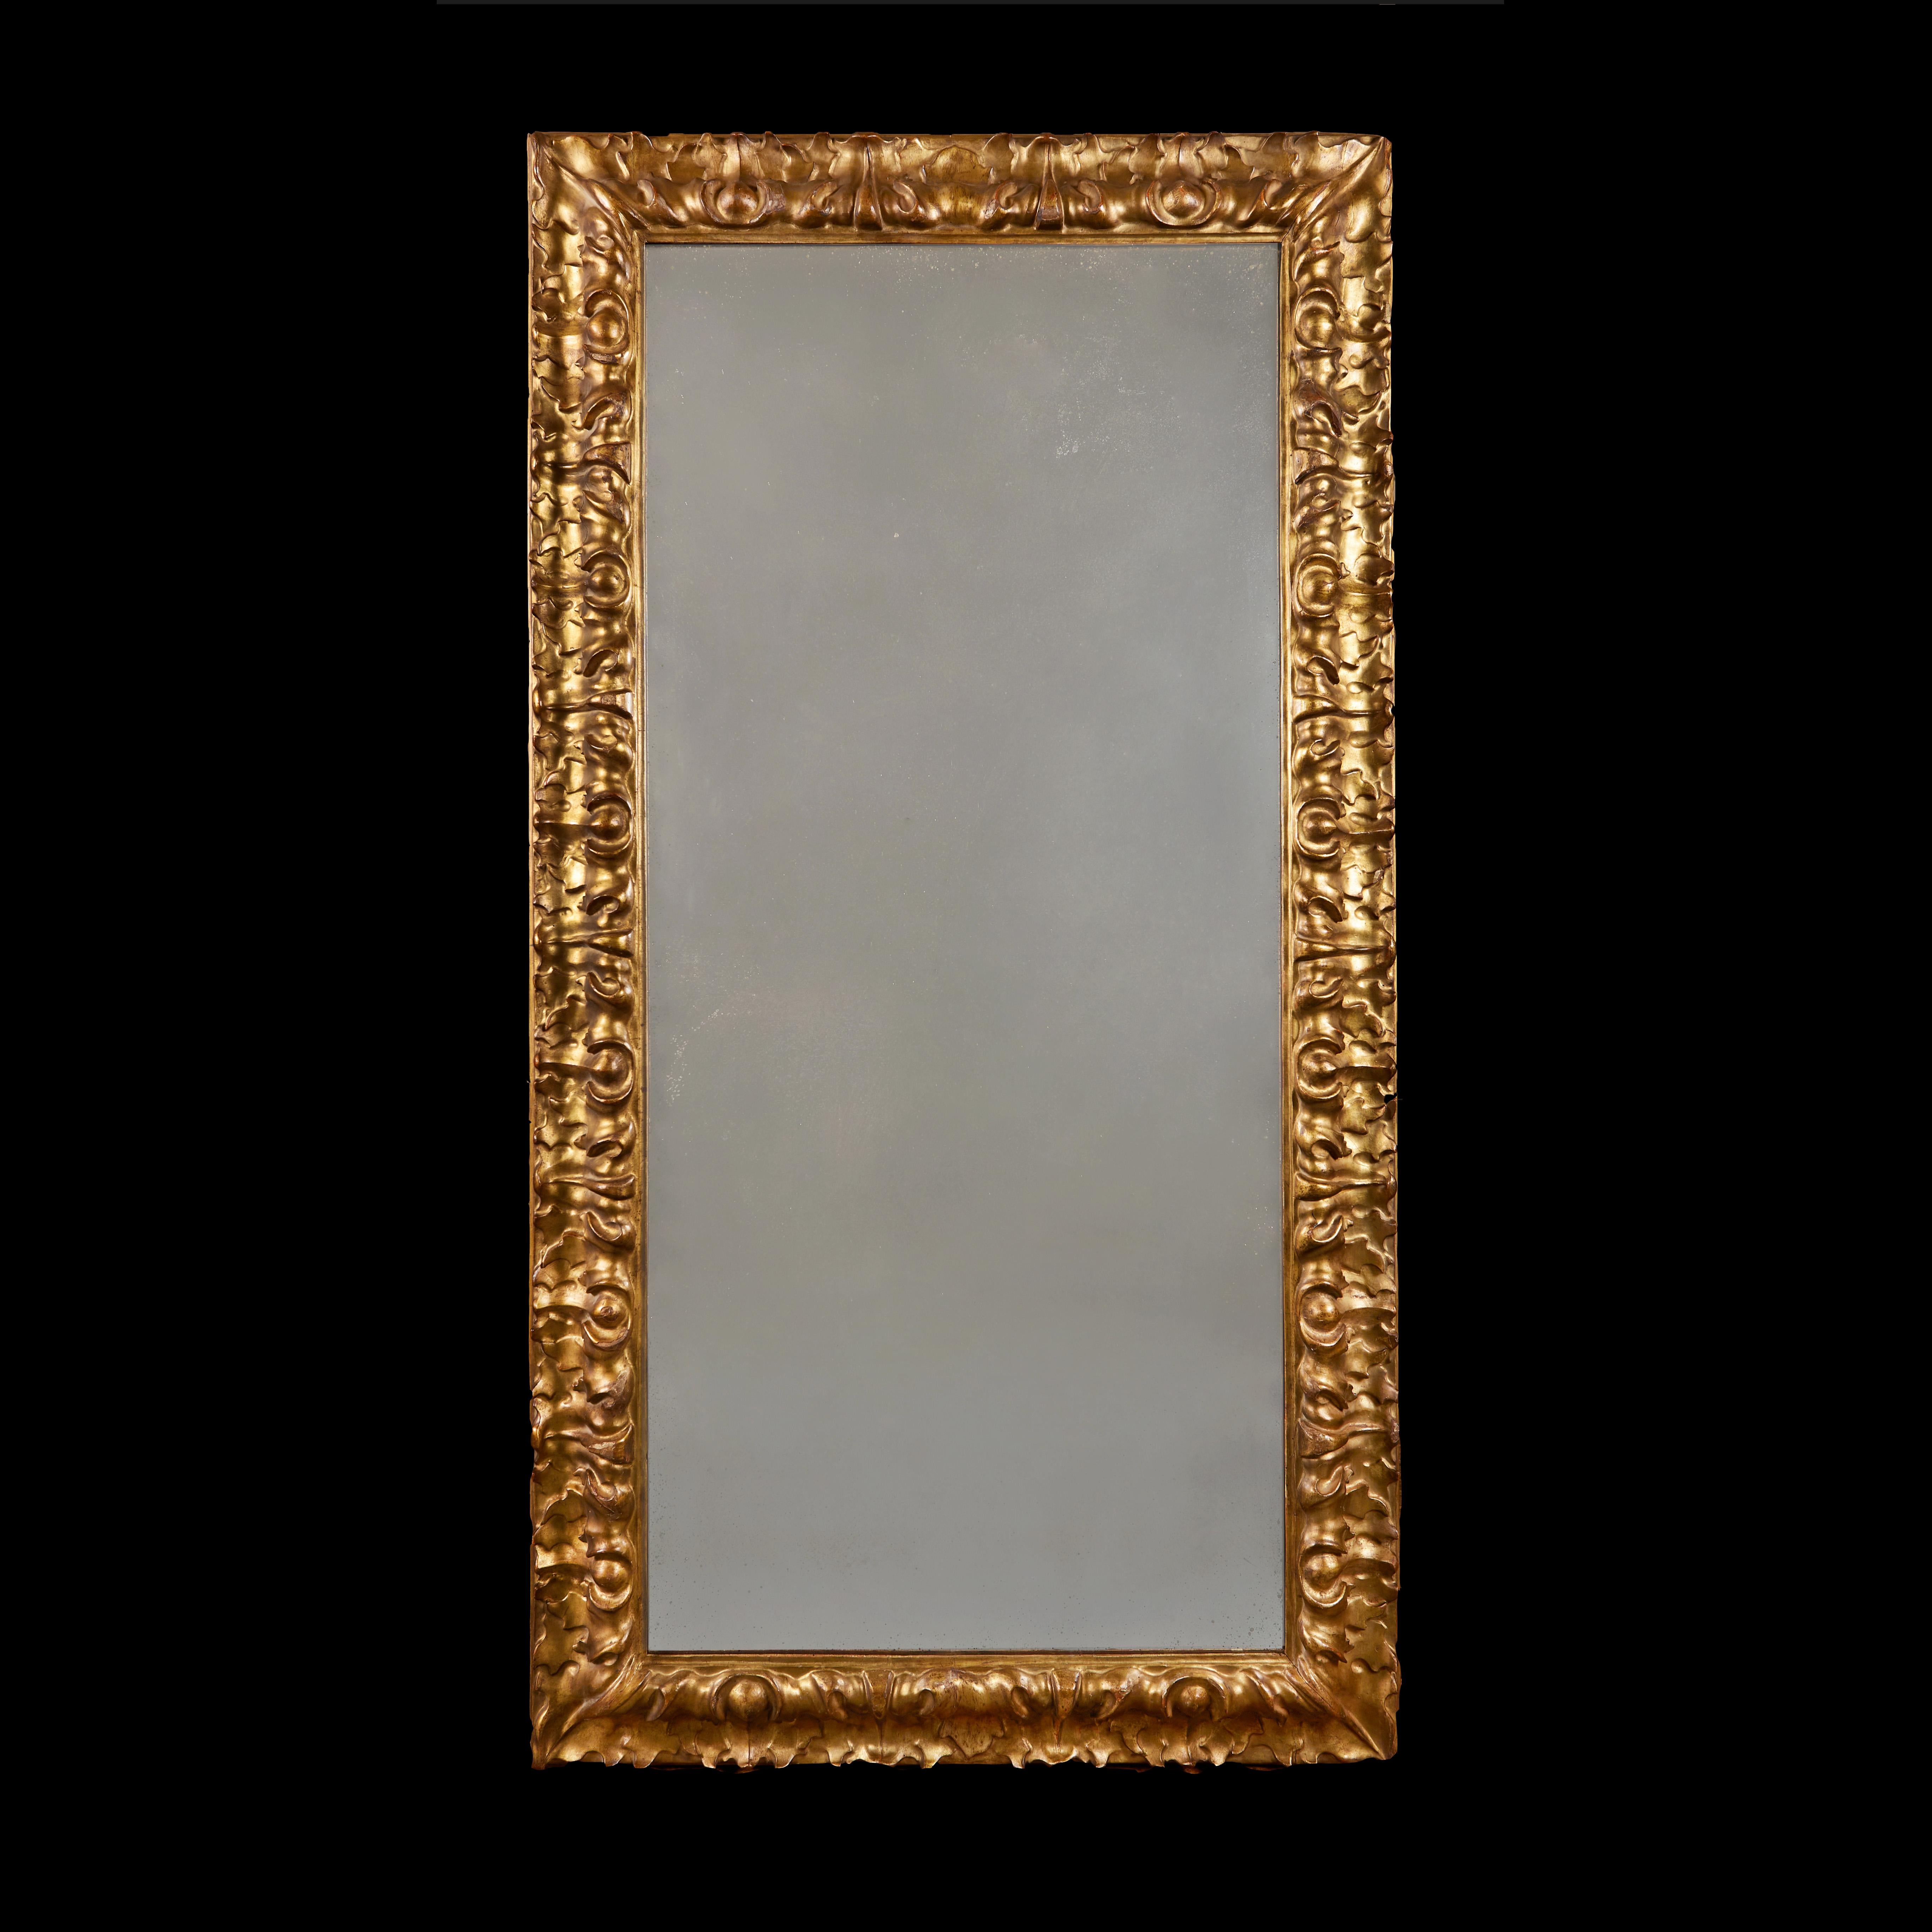 Italy, Florence, circa 1780.

A fine late eighteenth century giltwood pier mirror with wide border of deeply carved repeating foliate designs, with mercury mirror plate.

Height 170.00cm.
Width 91.00cm.
Depth 9.00cm.